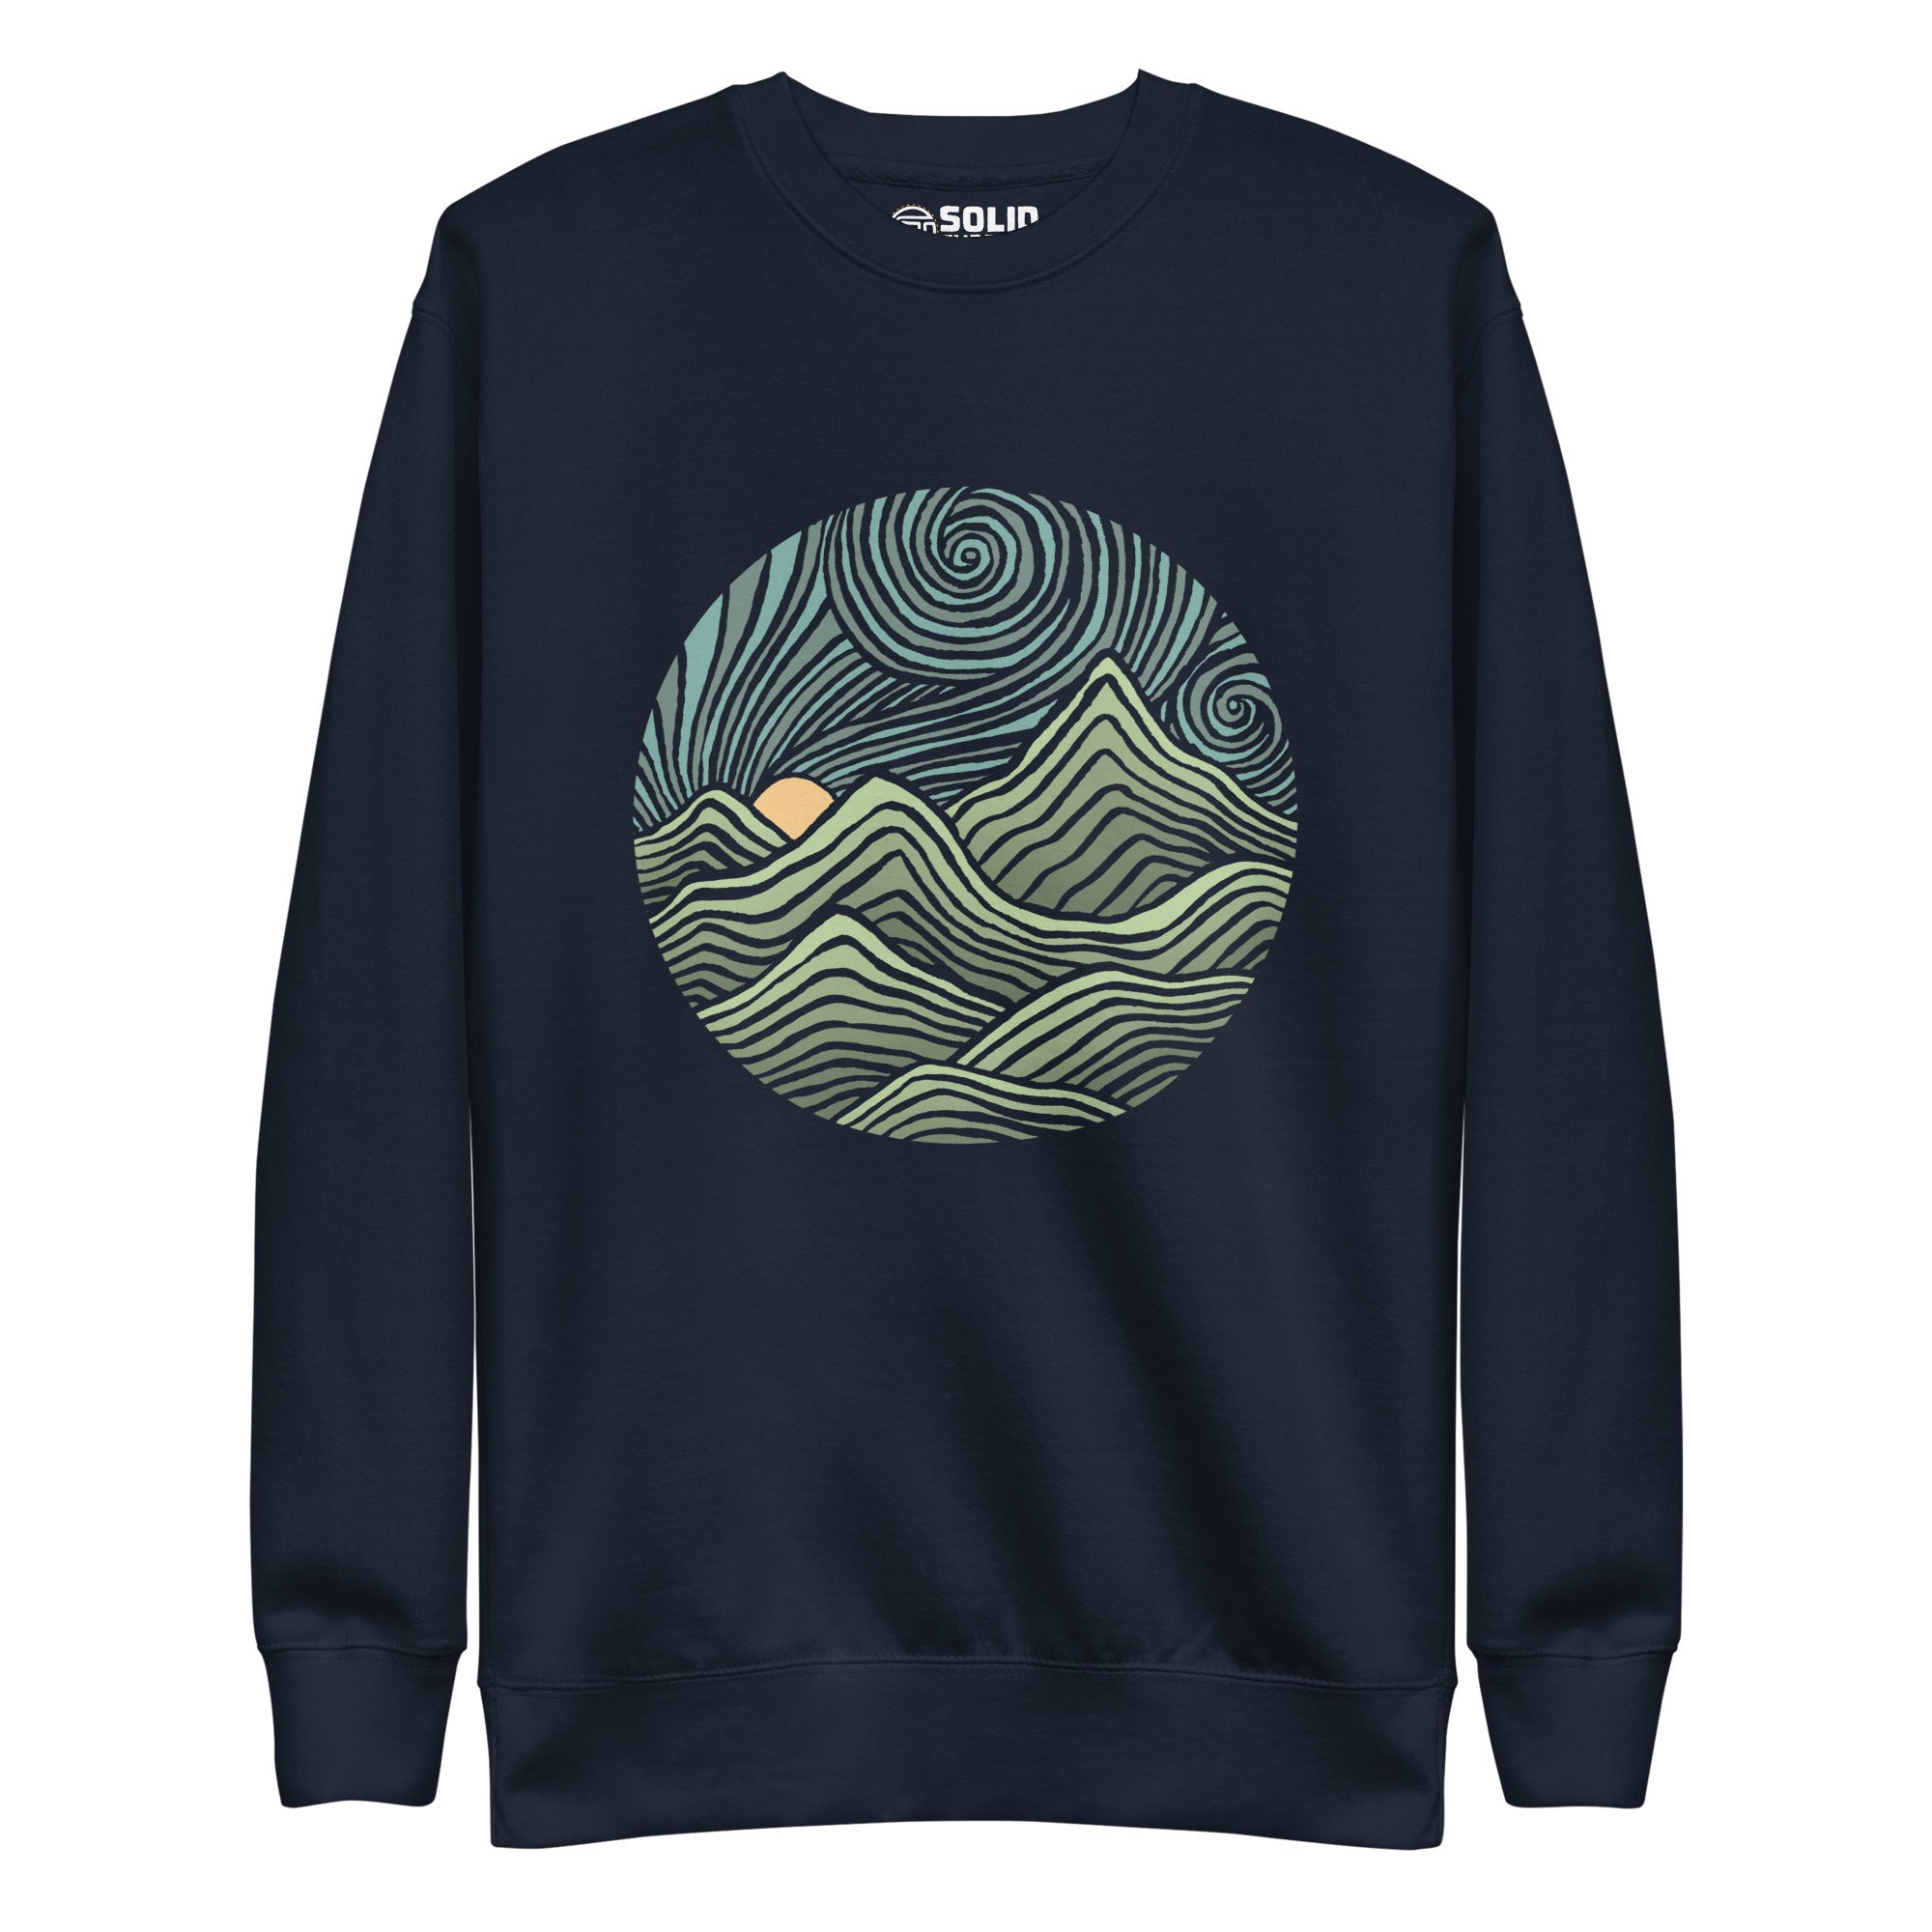 Swirly Mountains | Design By Dylan Fant Cool Classic Sweatshirt | Vintage Nature Fleece | Solid Threads